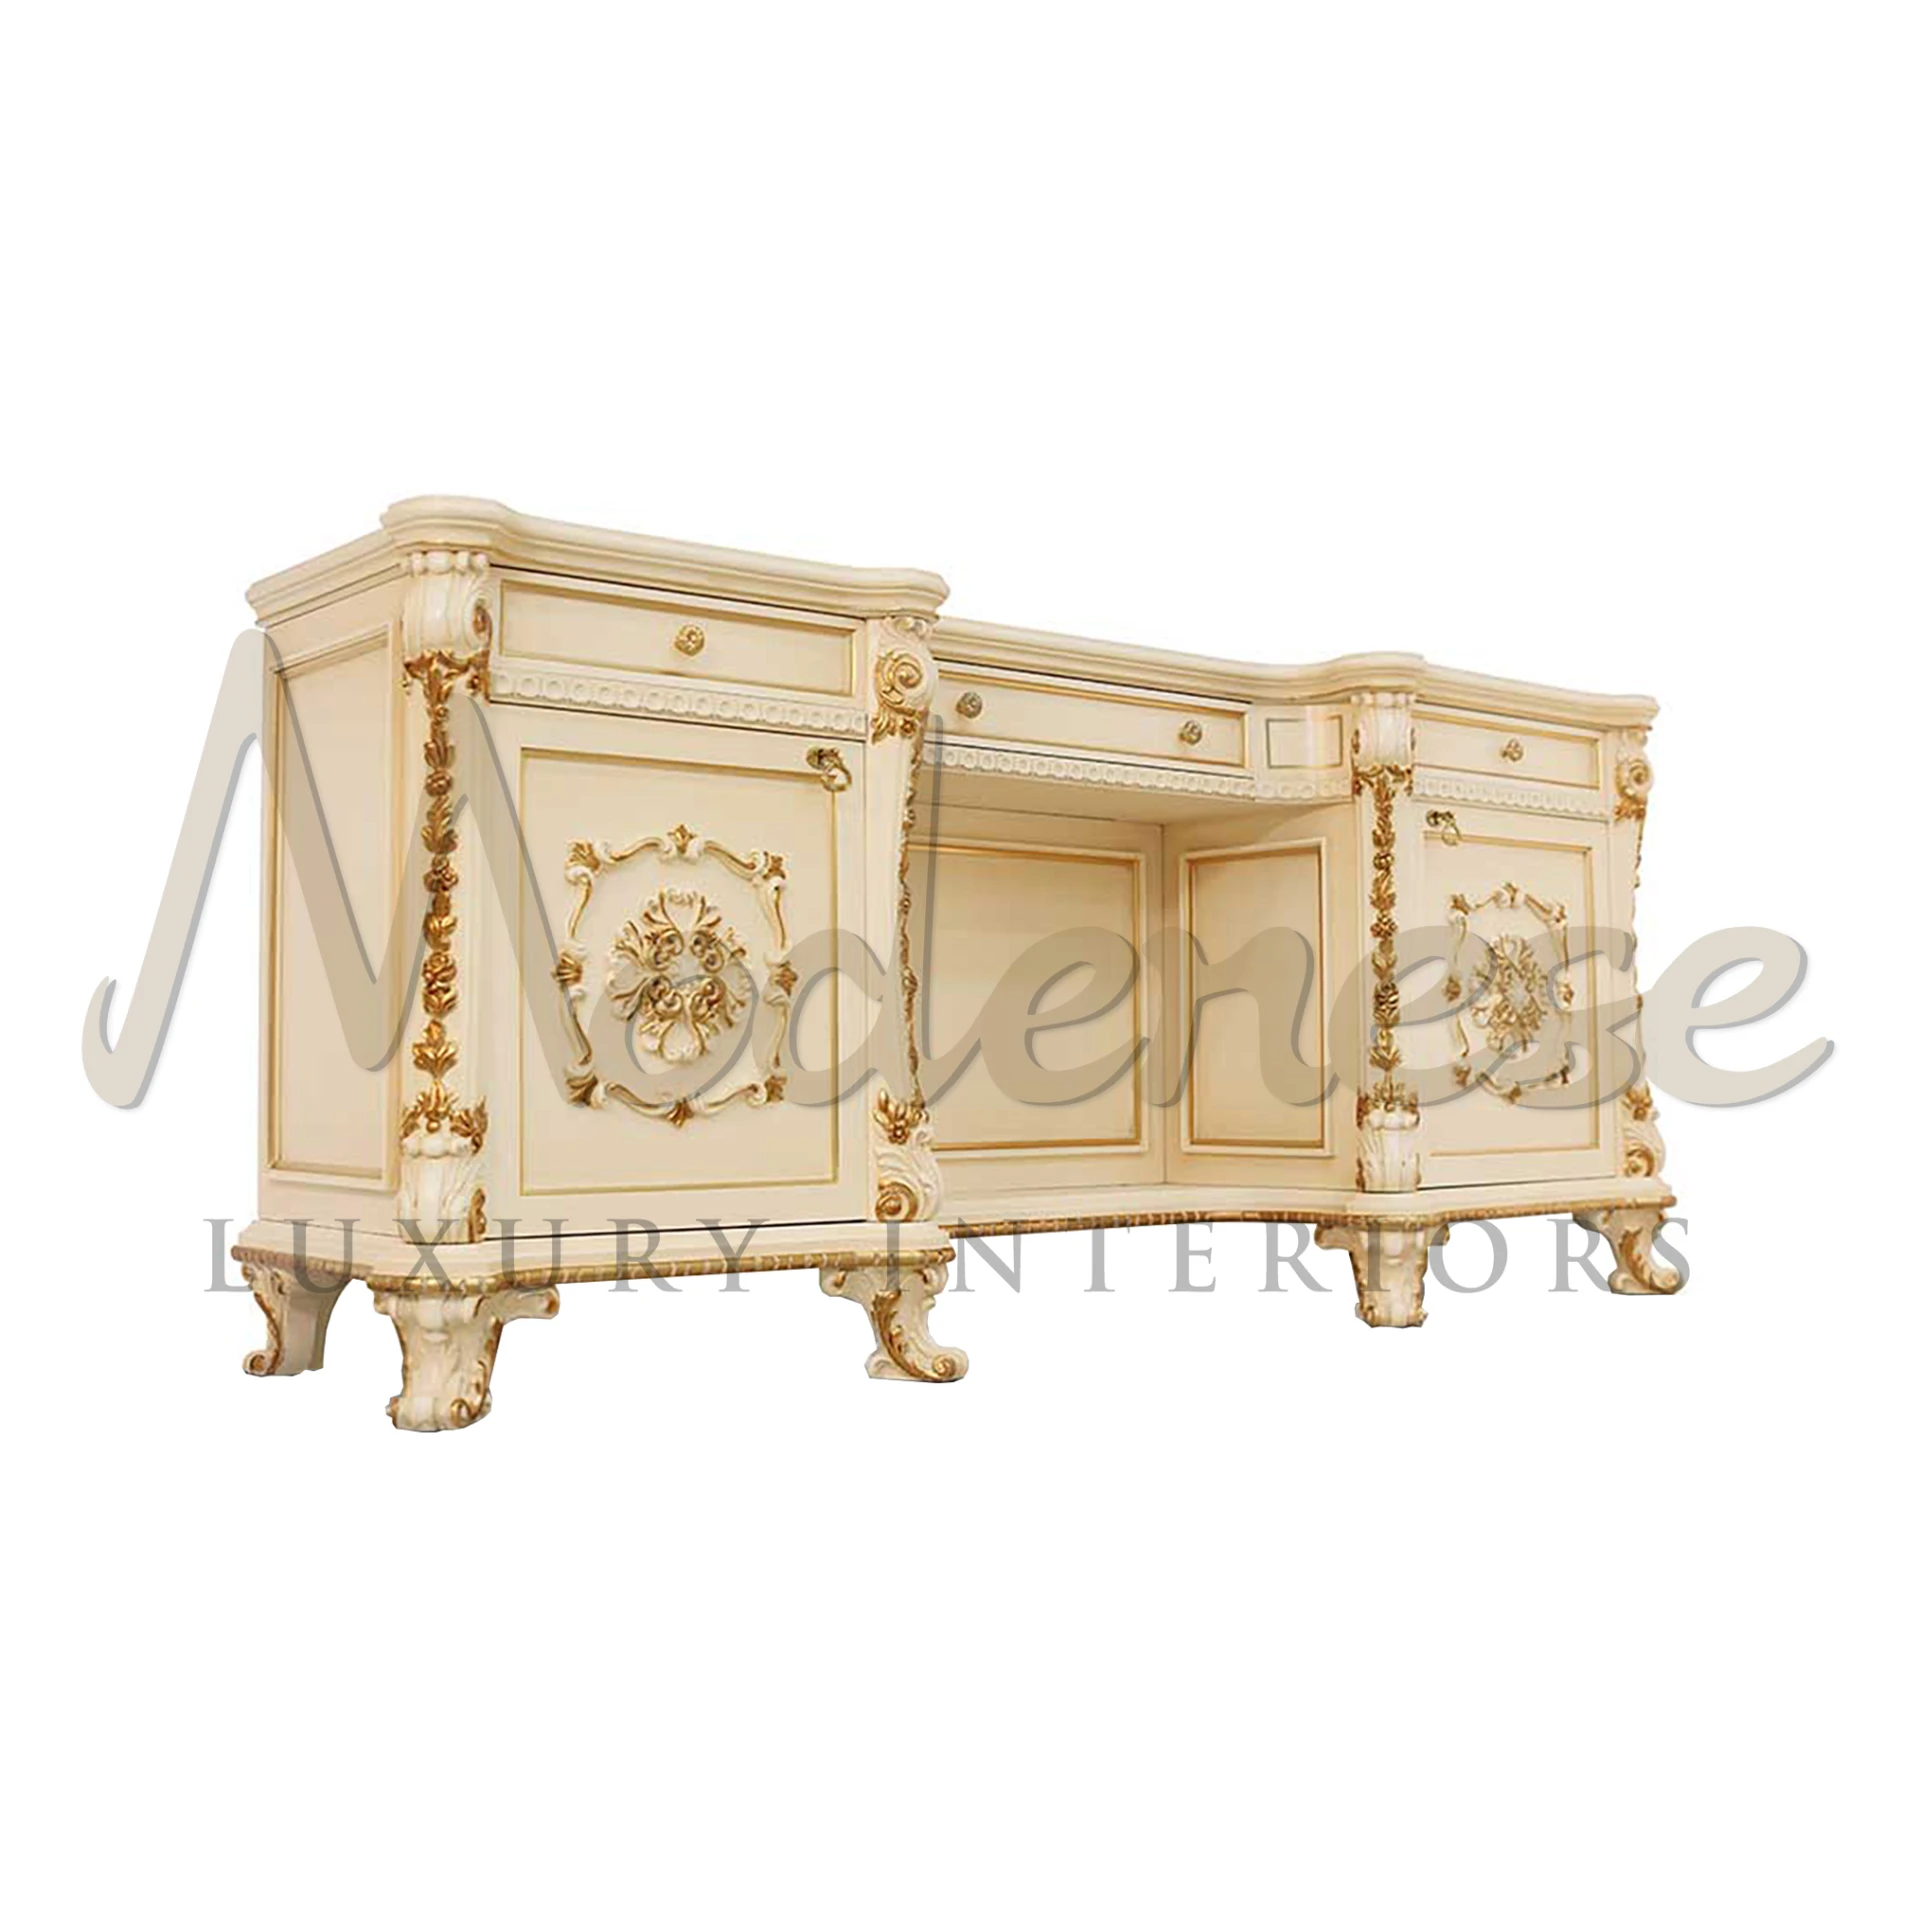 Ornate classical cream-colored dressing table with gold accents and carved details in a French antique style created by Modenese Furniture Manufacturer